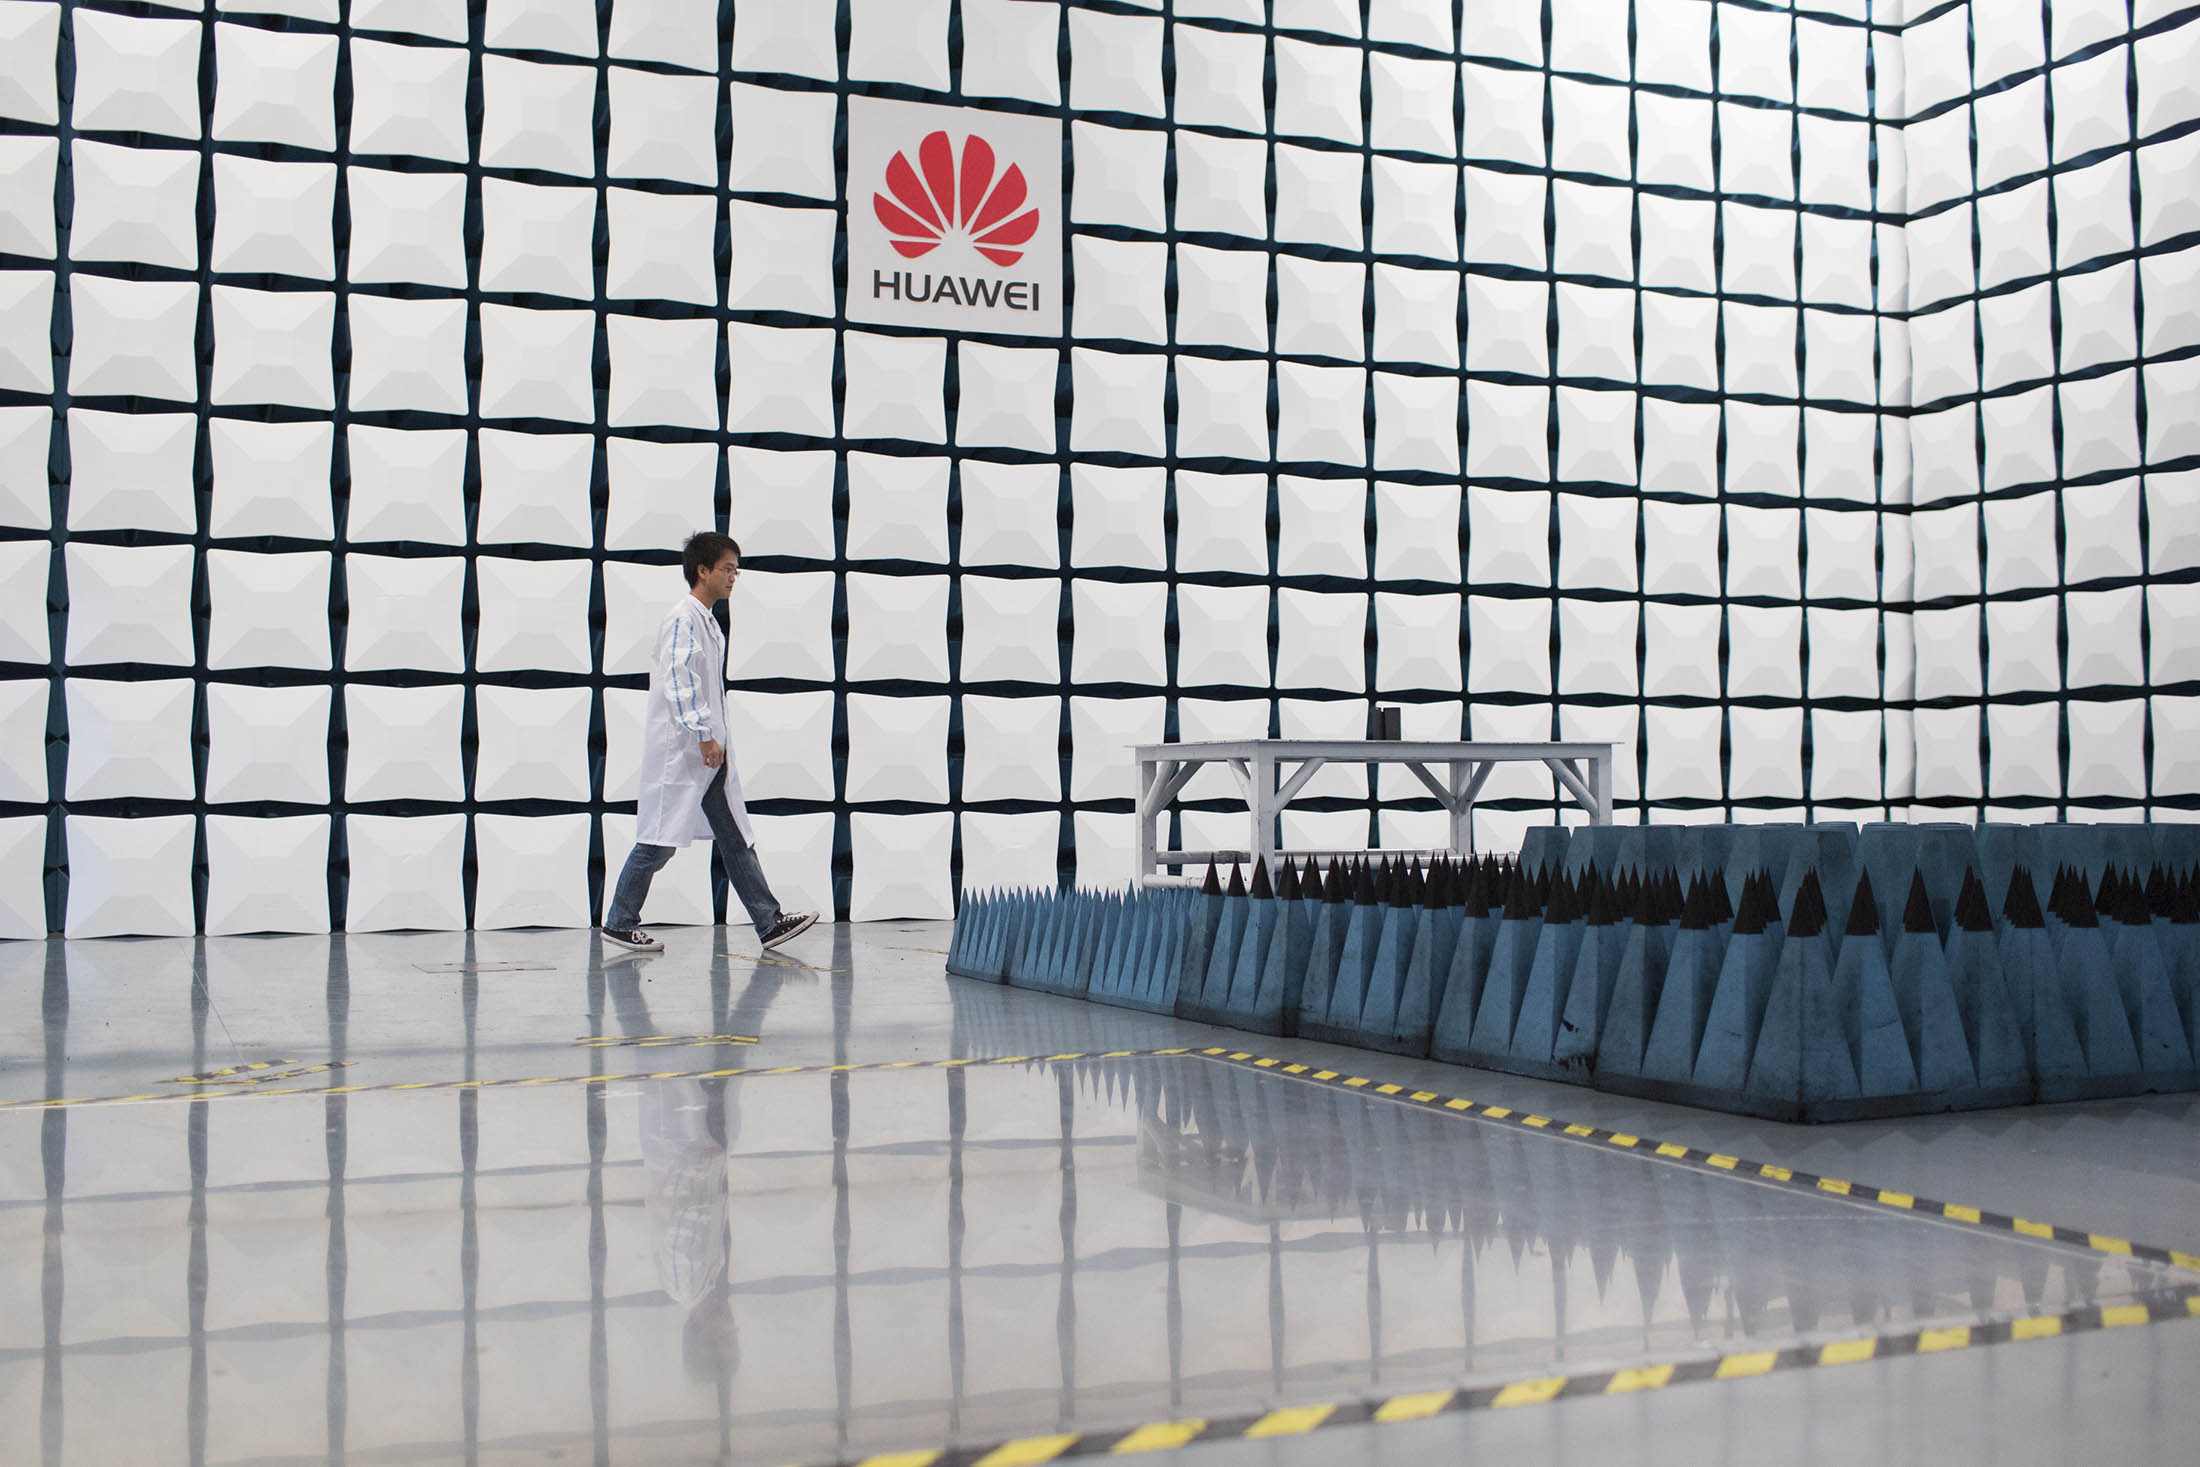 Inside a testing center at Huawei's campus in Shenzhen, China.
